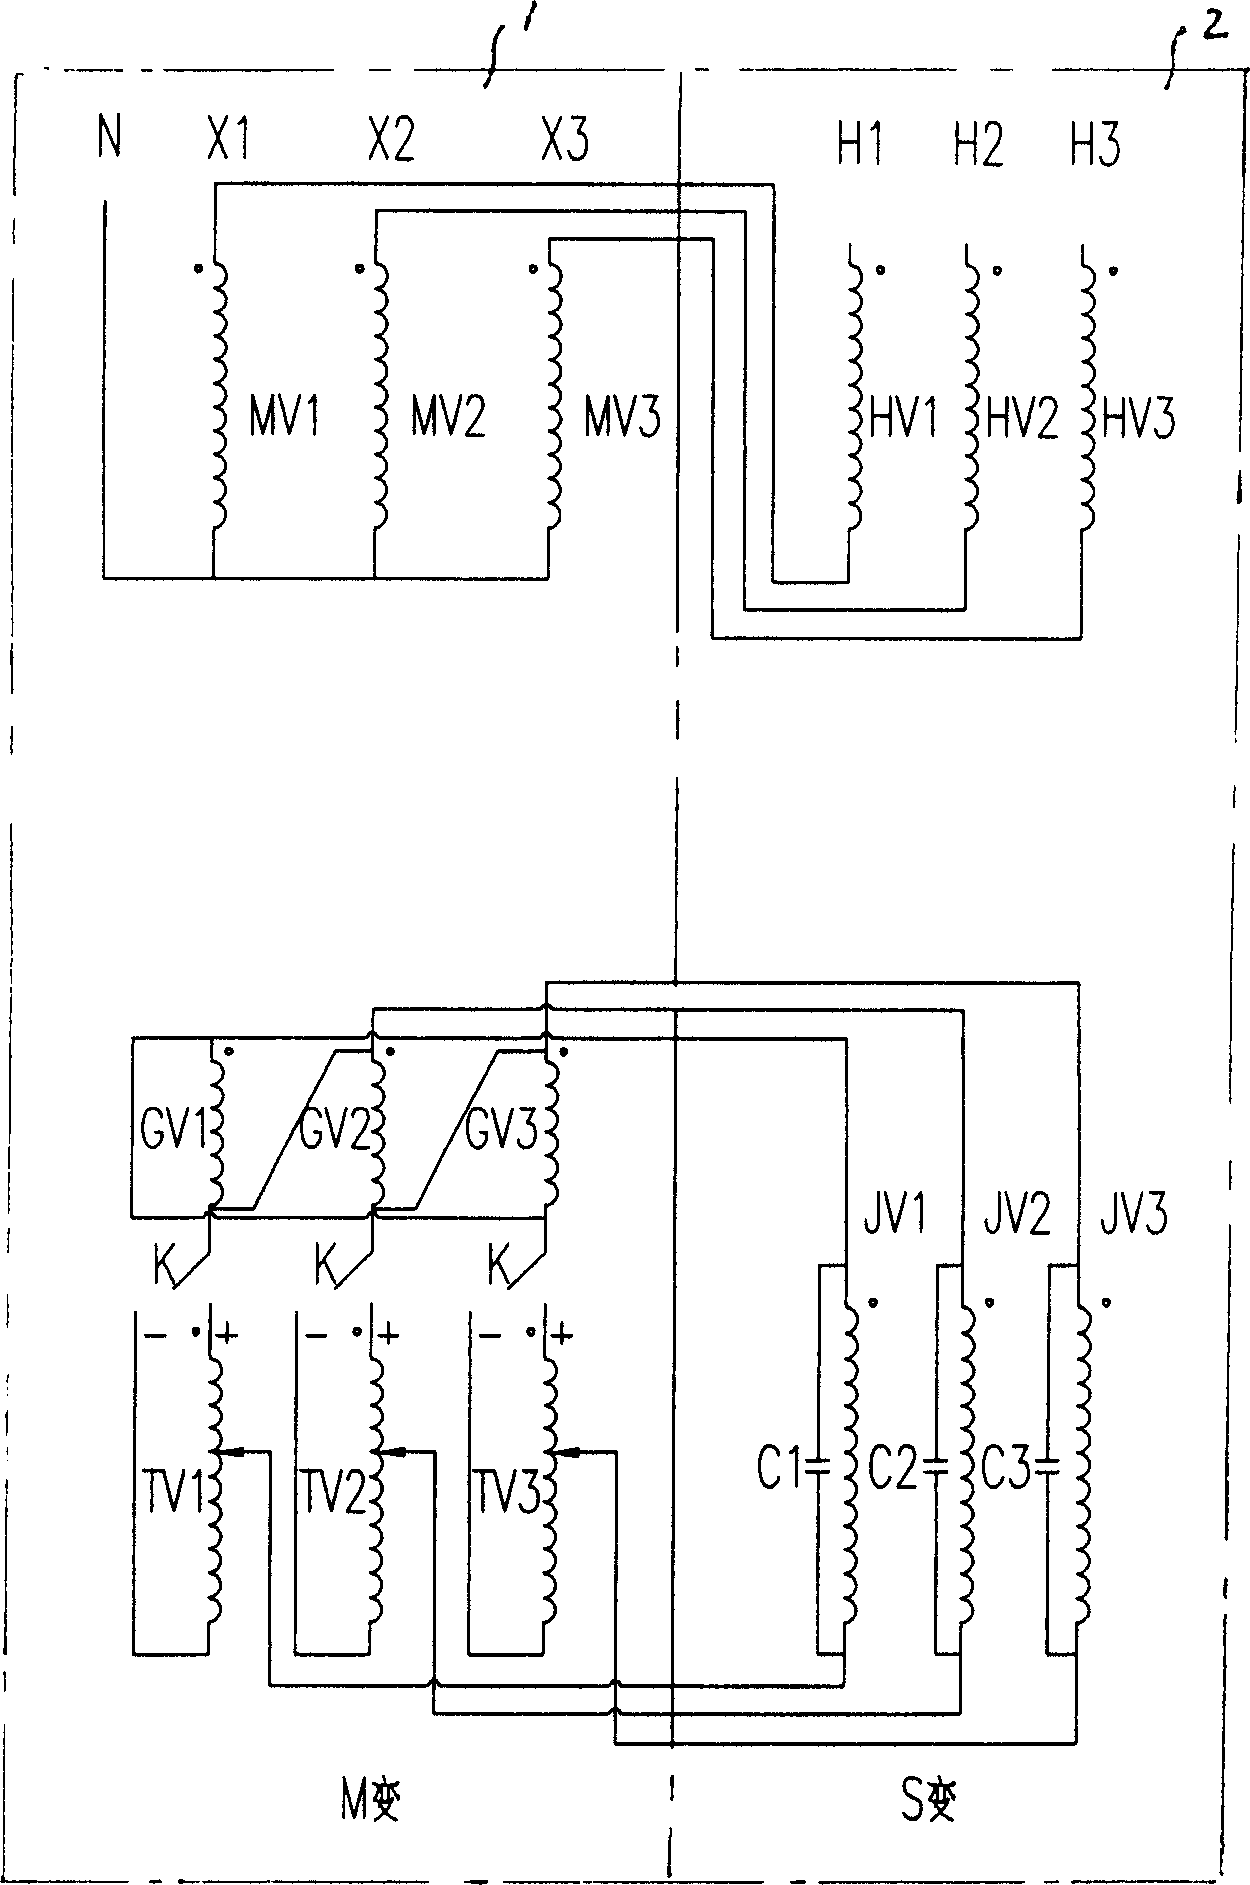 Method of lowering impact induction potential of large volume autotransformer